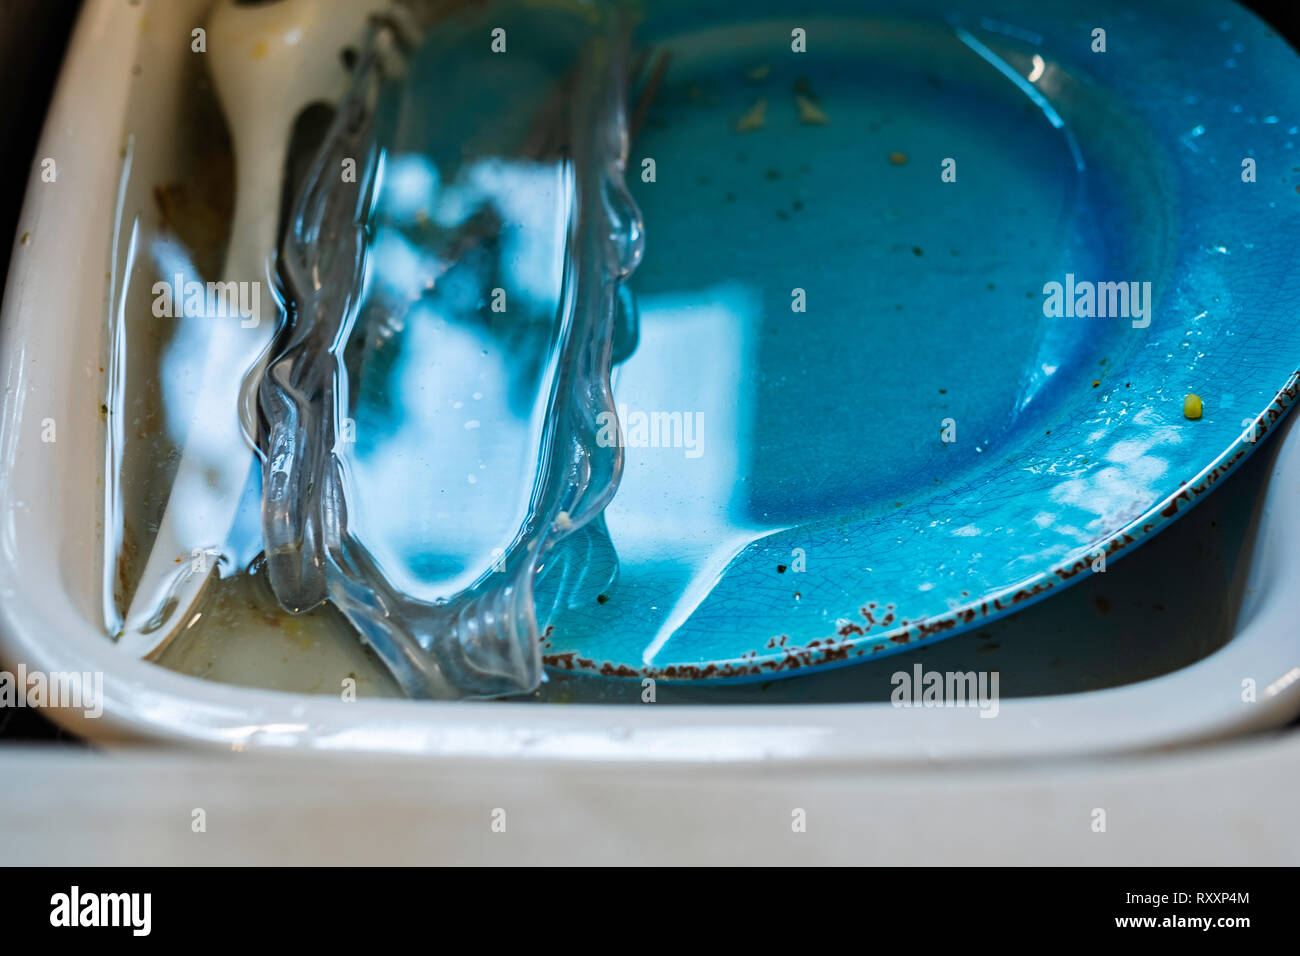 Unwashed dirty dishes soaking in a sink. Stock Photo